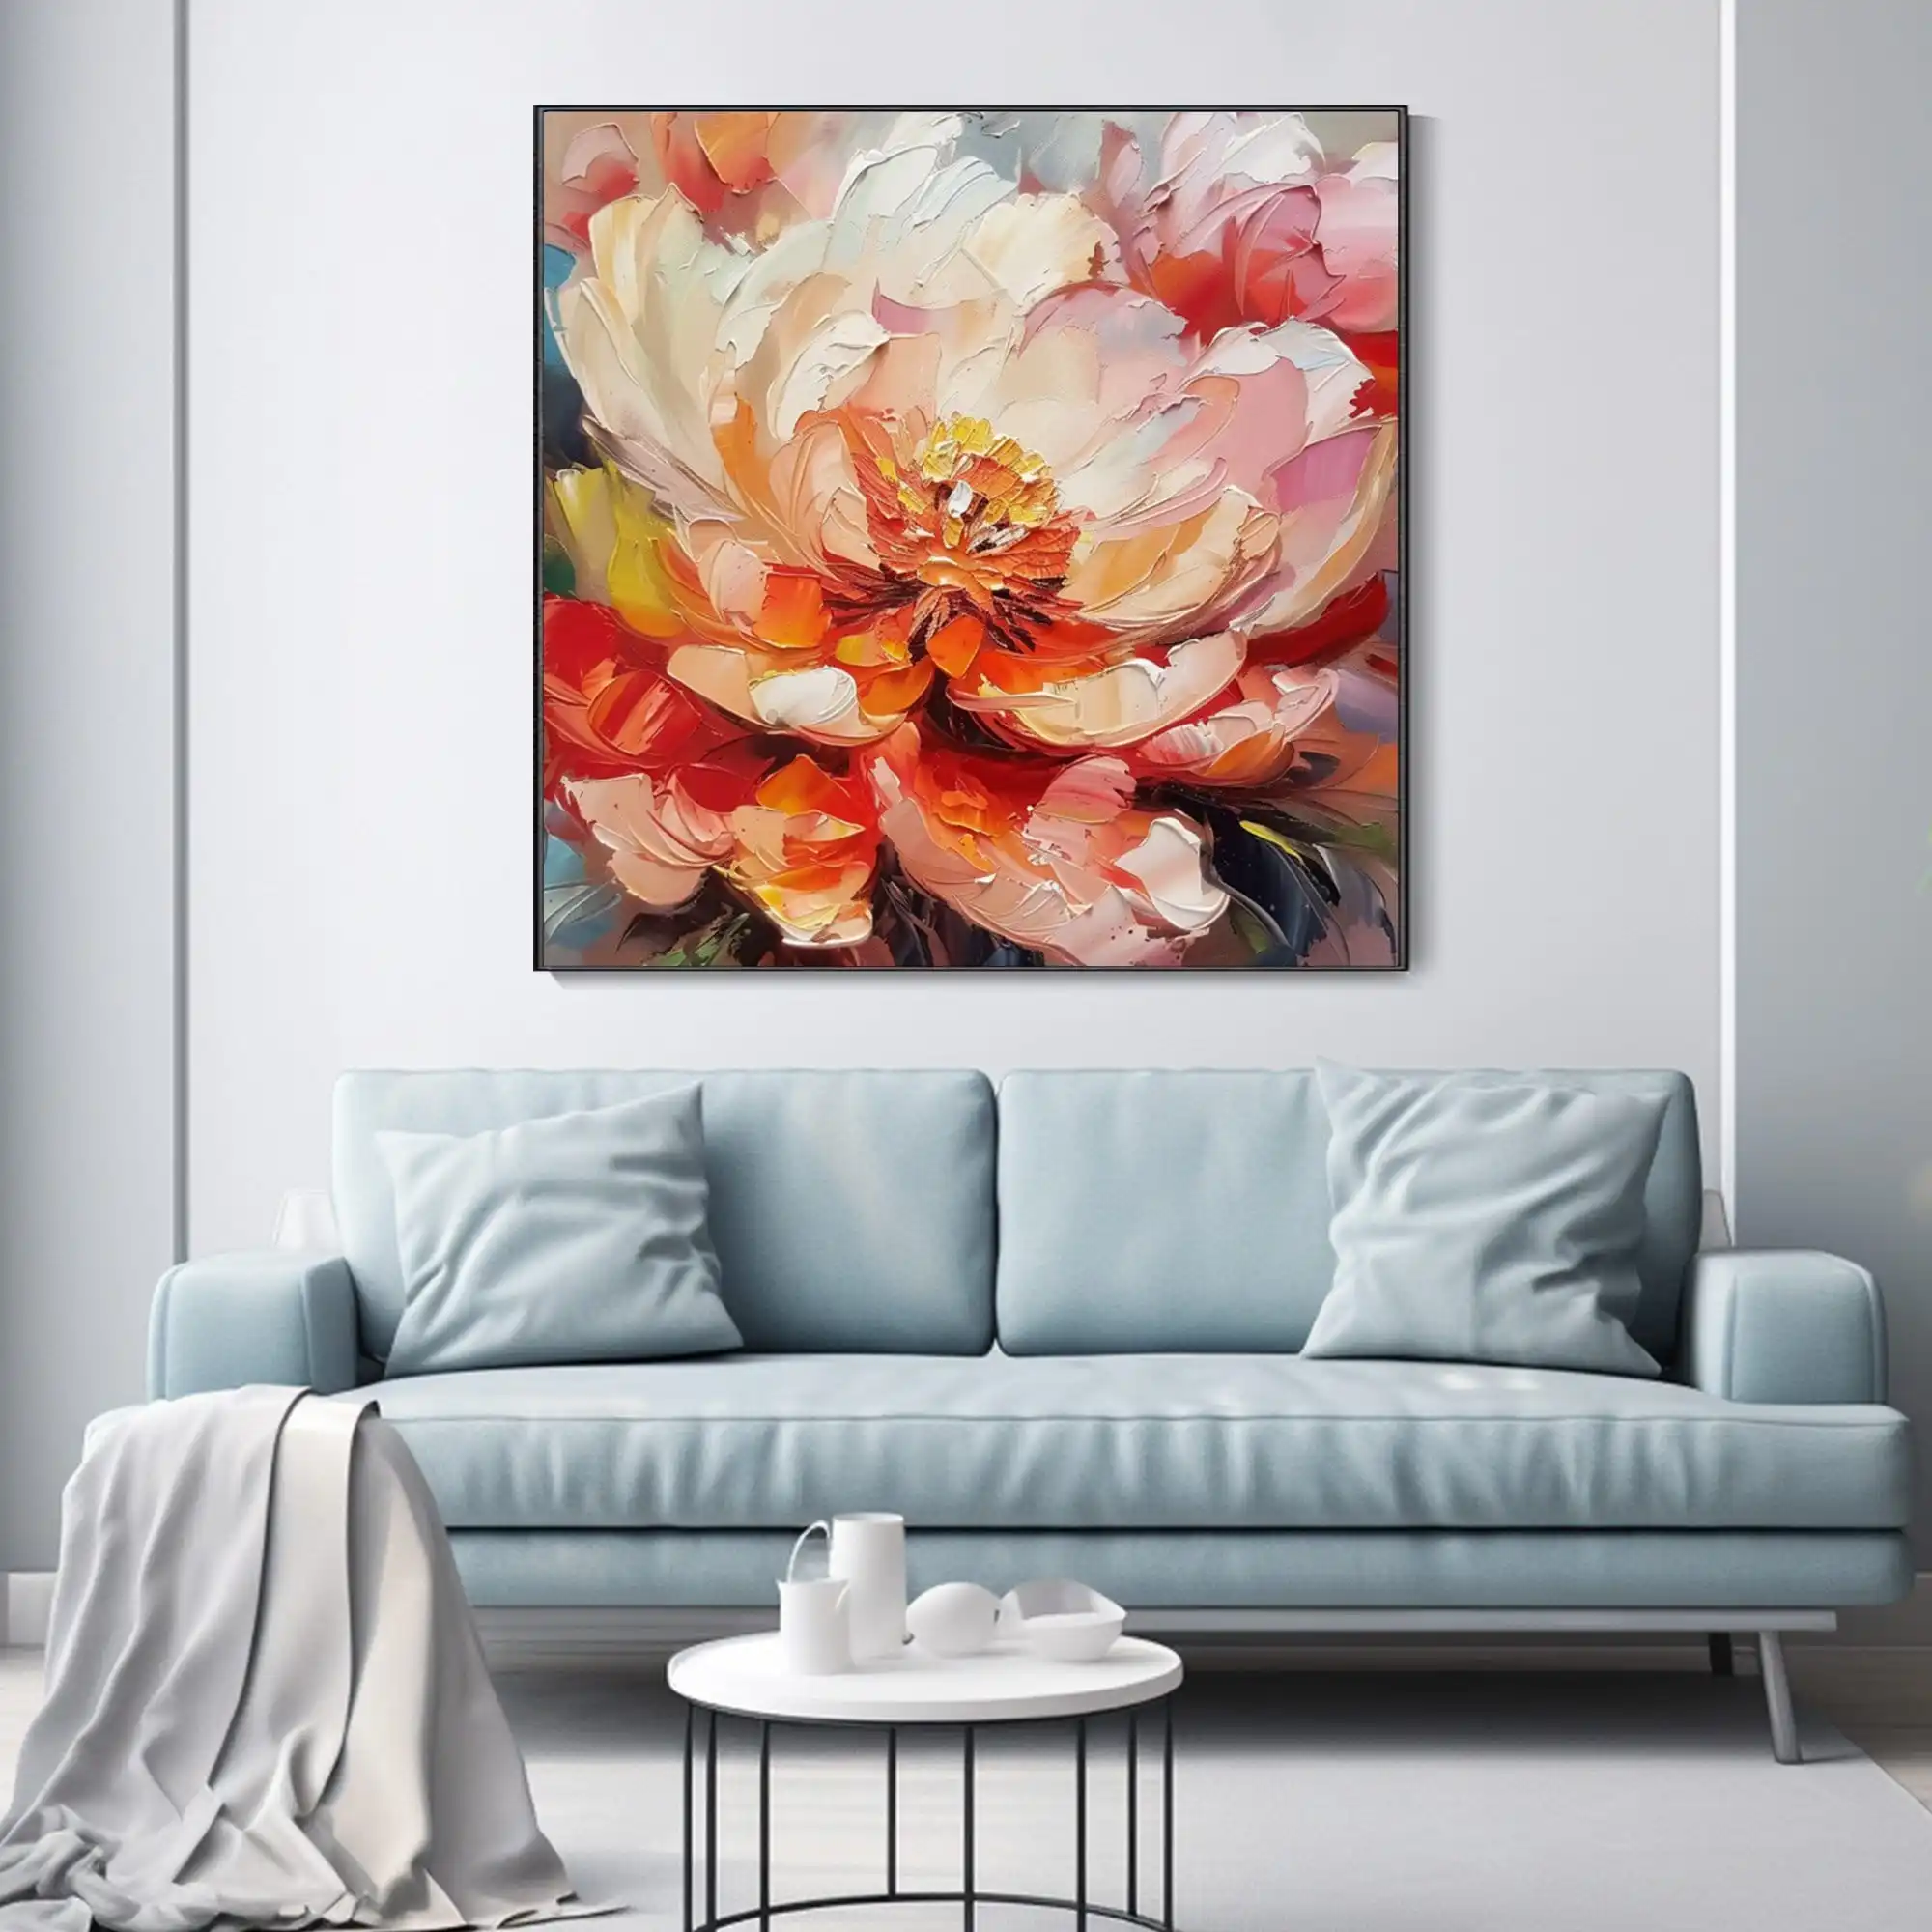 

Modern Hand-Painted Peony Oil Painting Thick Texture Living Room Decor Impressionist Original Artwork Home Landscape Canvas Art